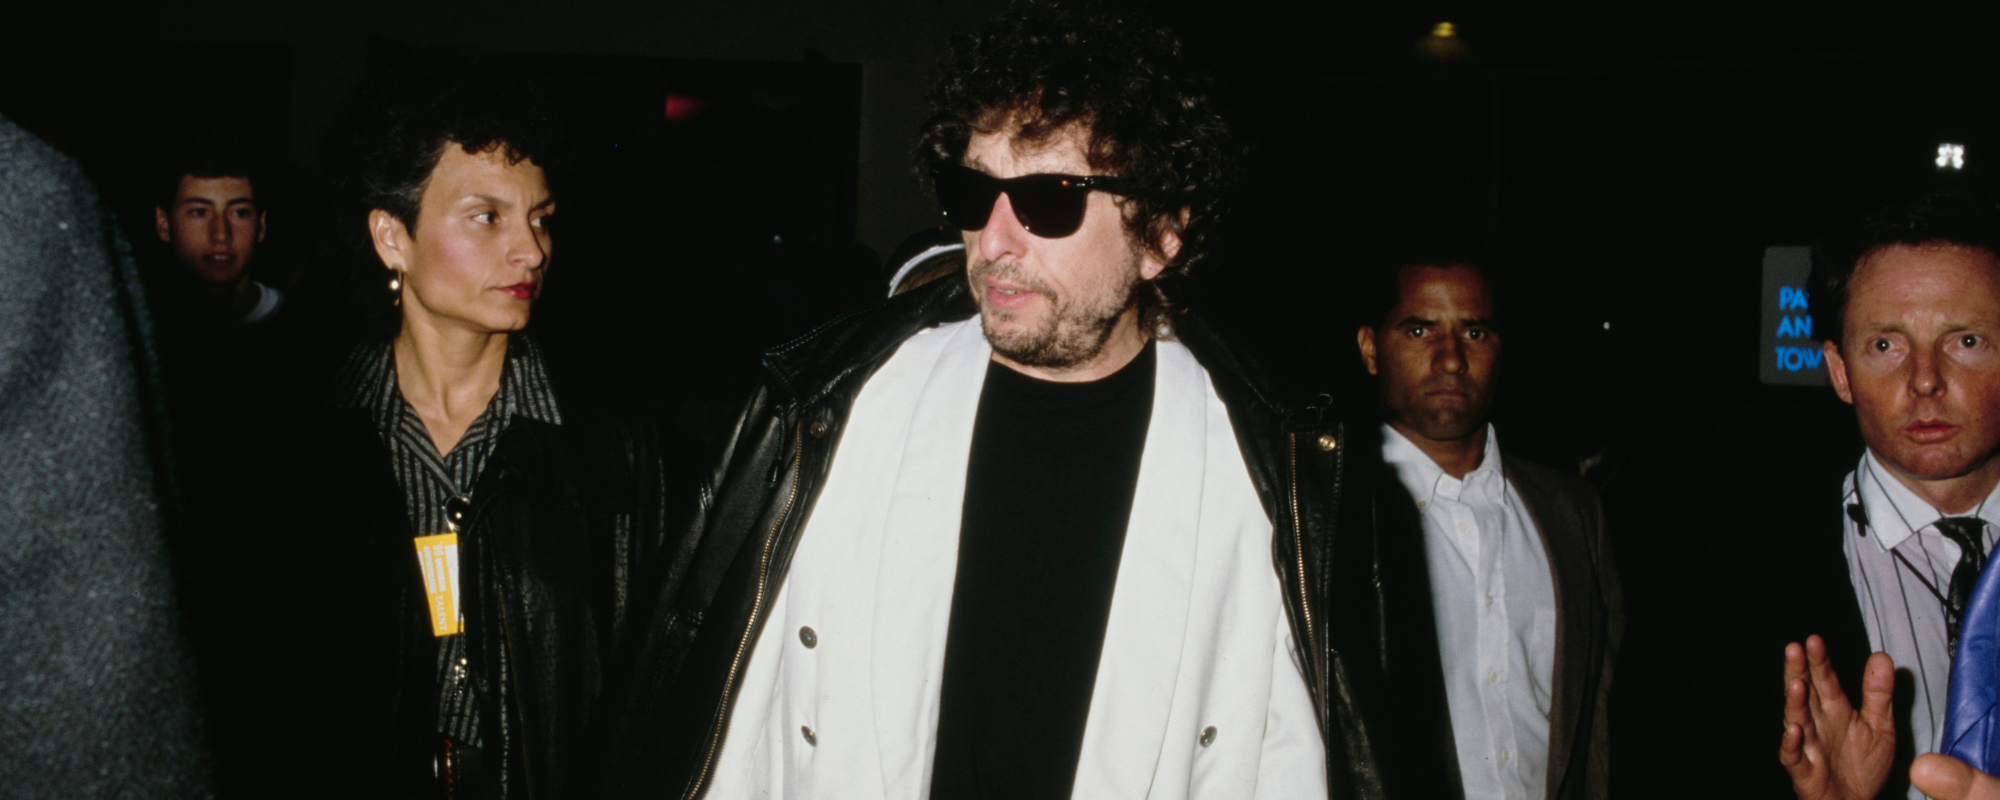 Remember When: Bob Dylan Makes His Greatest Comeback with ‘Time Out of Mind’